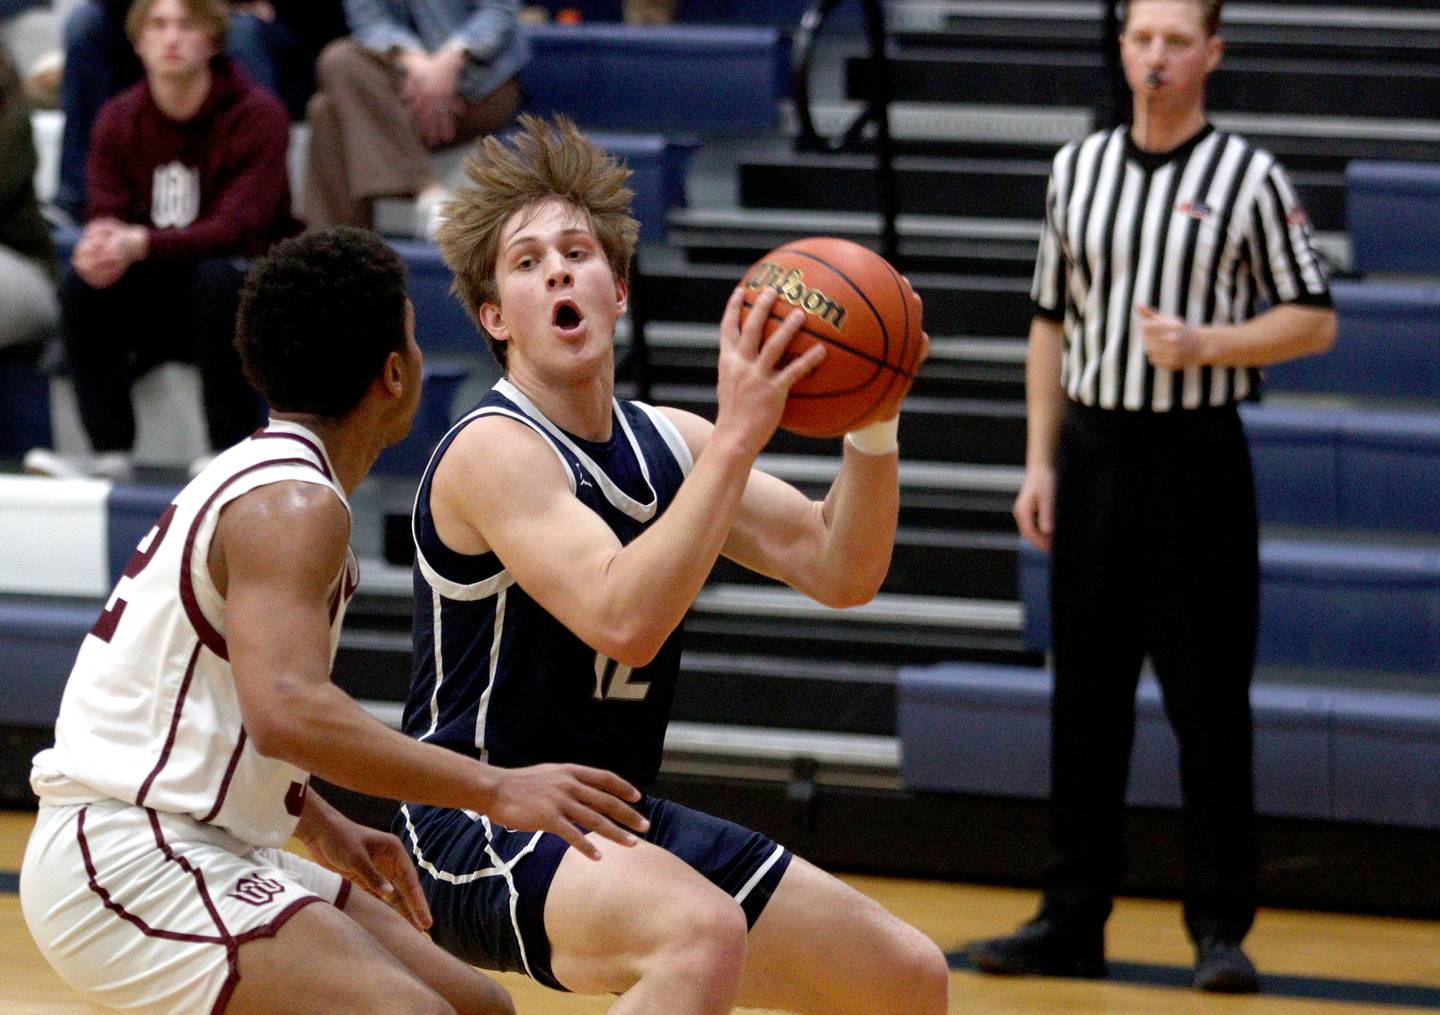 Cary-Grove’s Jake Hornok moves the ball against Wheaton Academy during Class 3A regional action in Cary on Wednesday night.